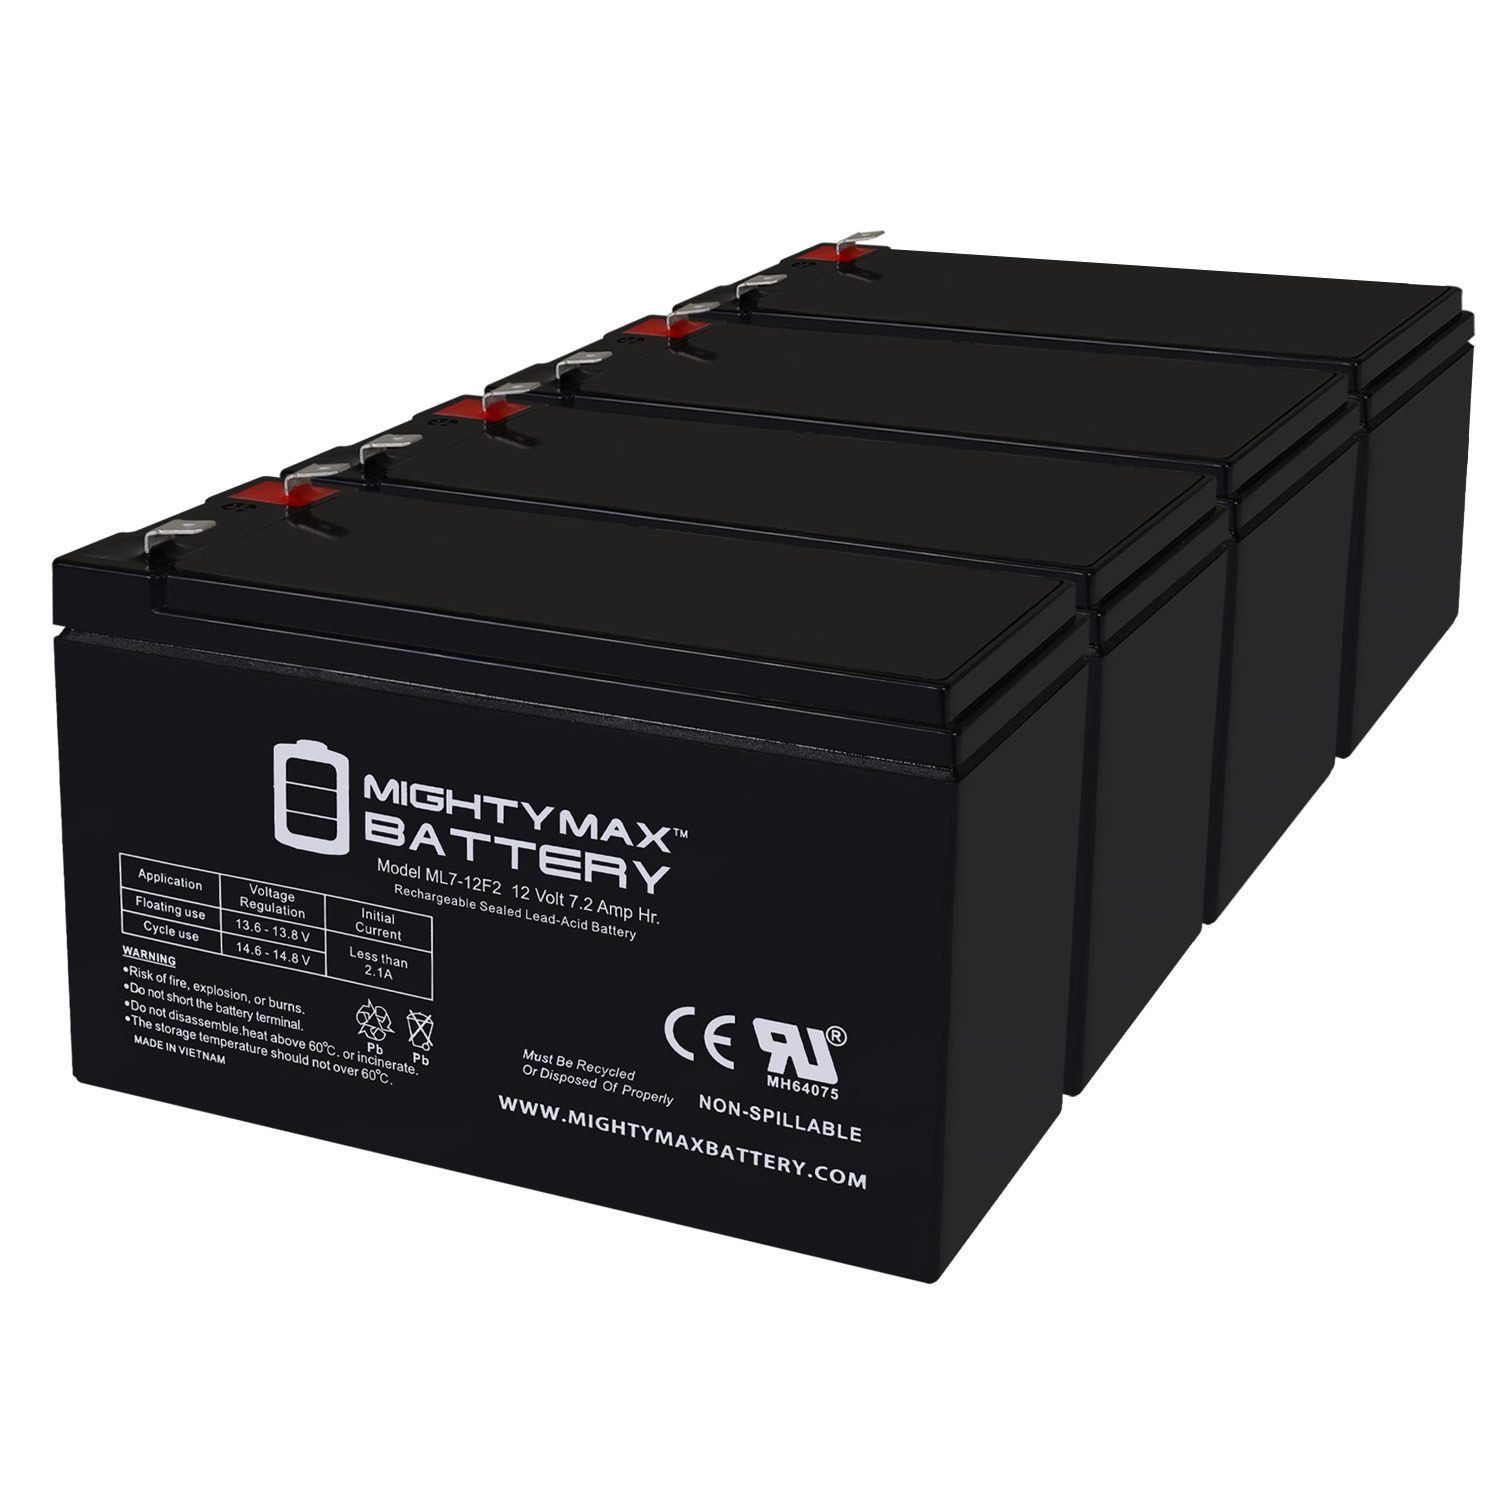 12V 7Ah F2 Replacement Battery for Kaylee Lotus Exige S KL-7011 - 4 Pack